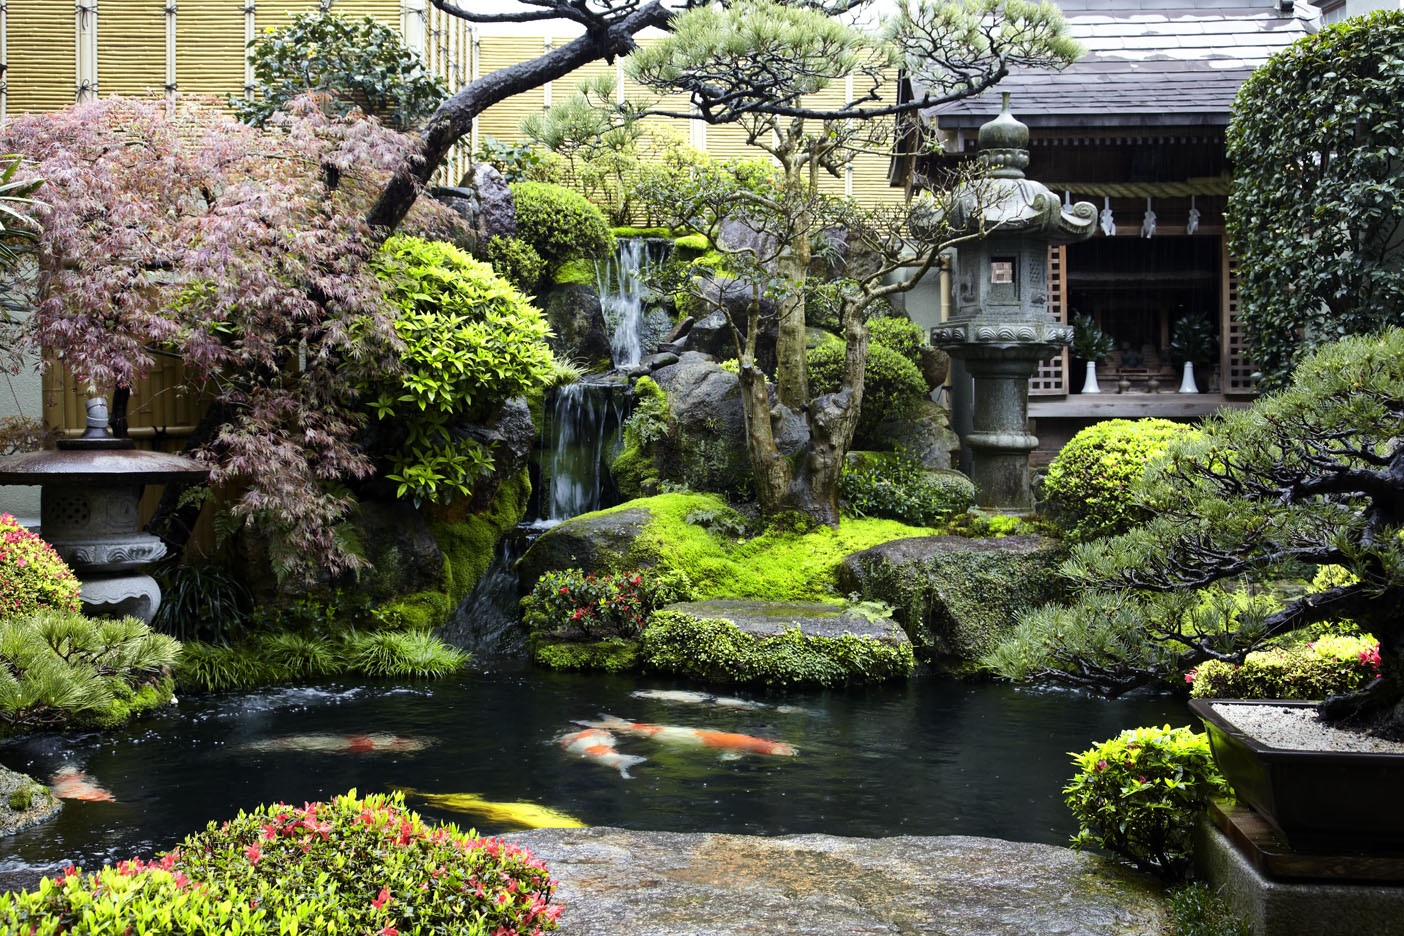 Amazing Garden At the Back Of A Shop In Japan